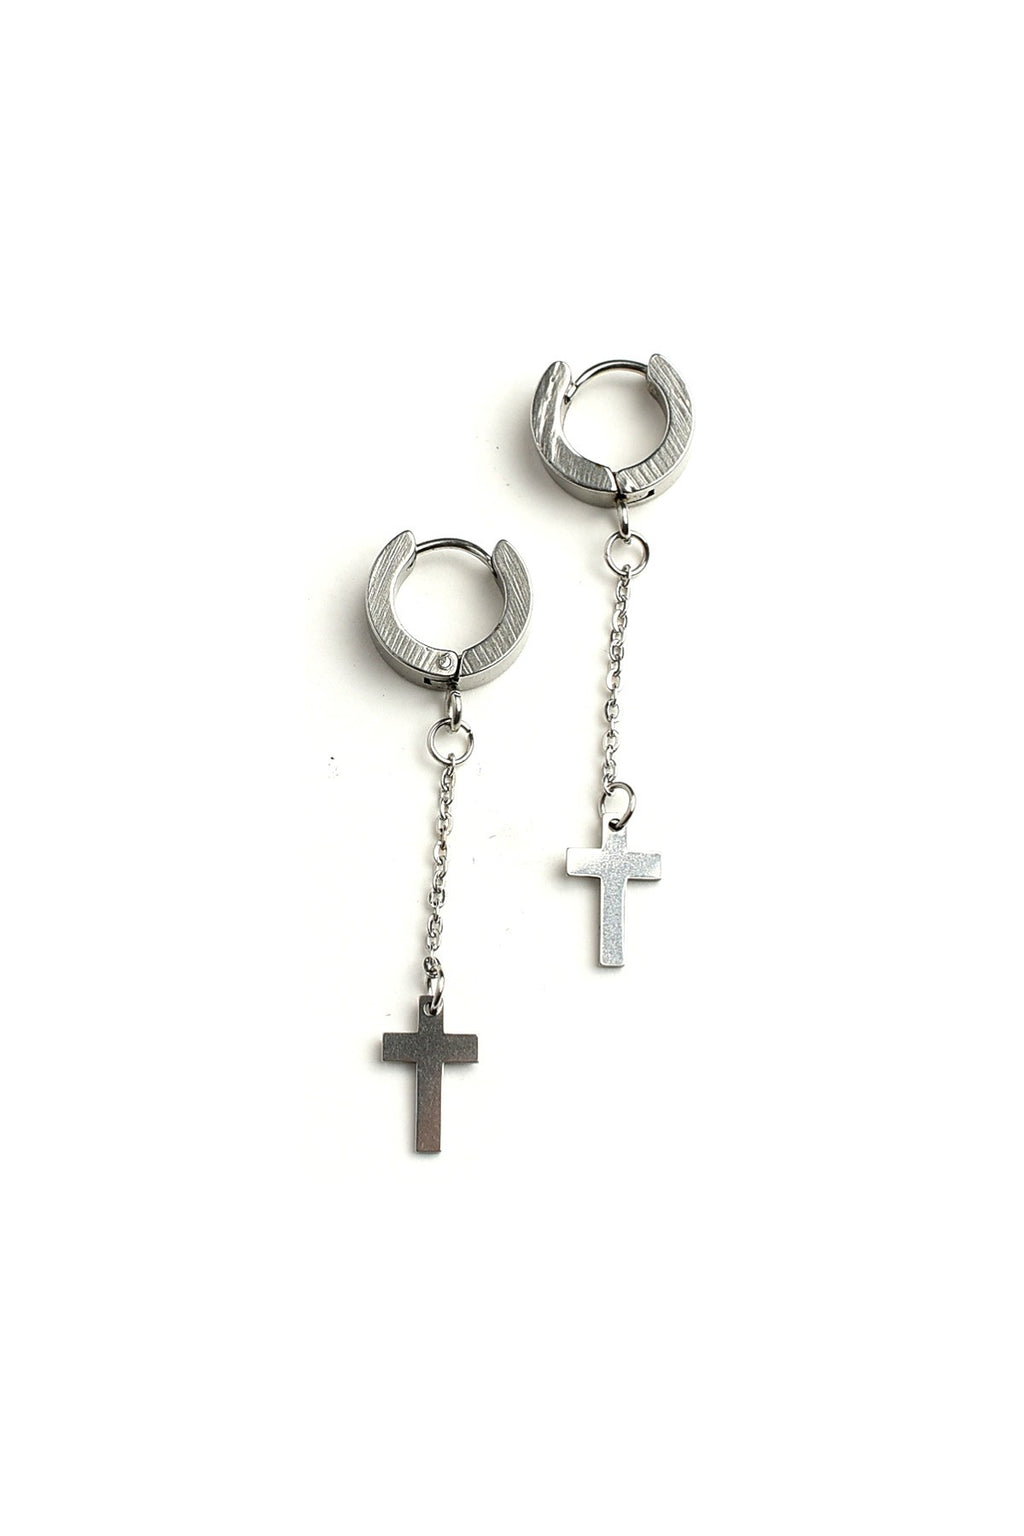 Hoop Earrings With A Cross Hanging from Chain